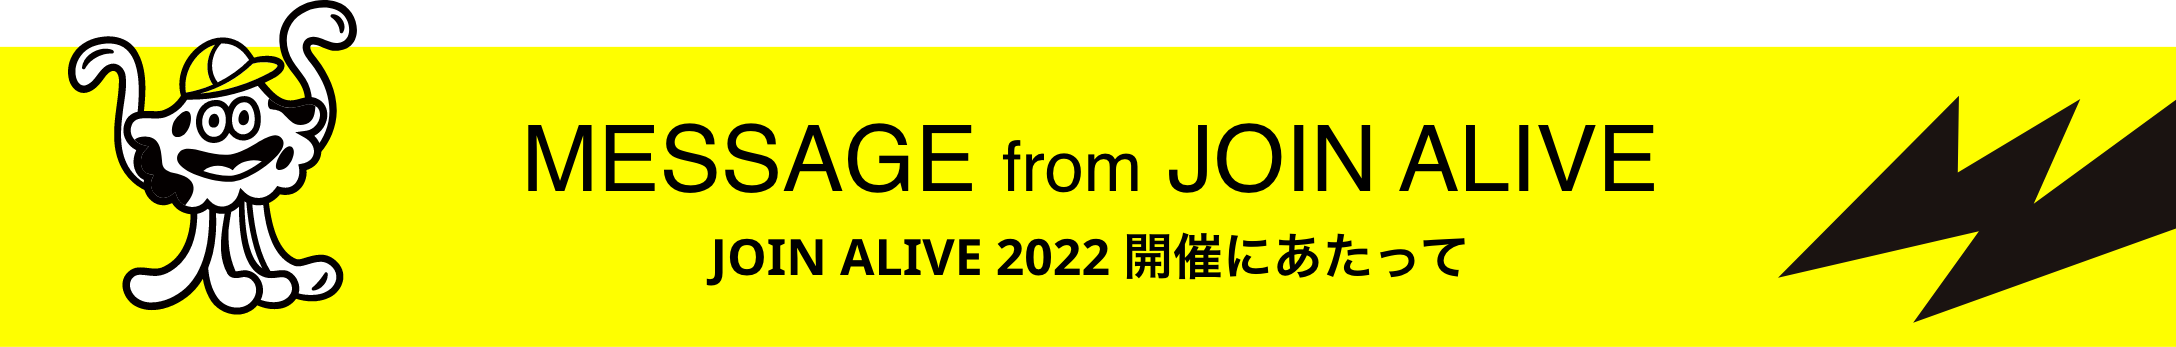 MESSAGE from JOIN ALIVE JOIN ALIVE 2022 開催にあたって